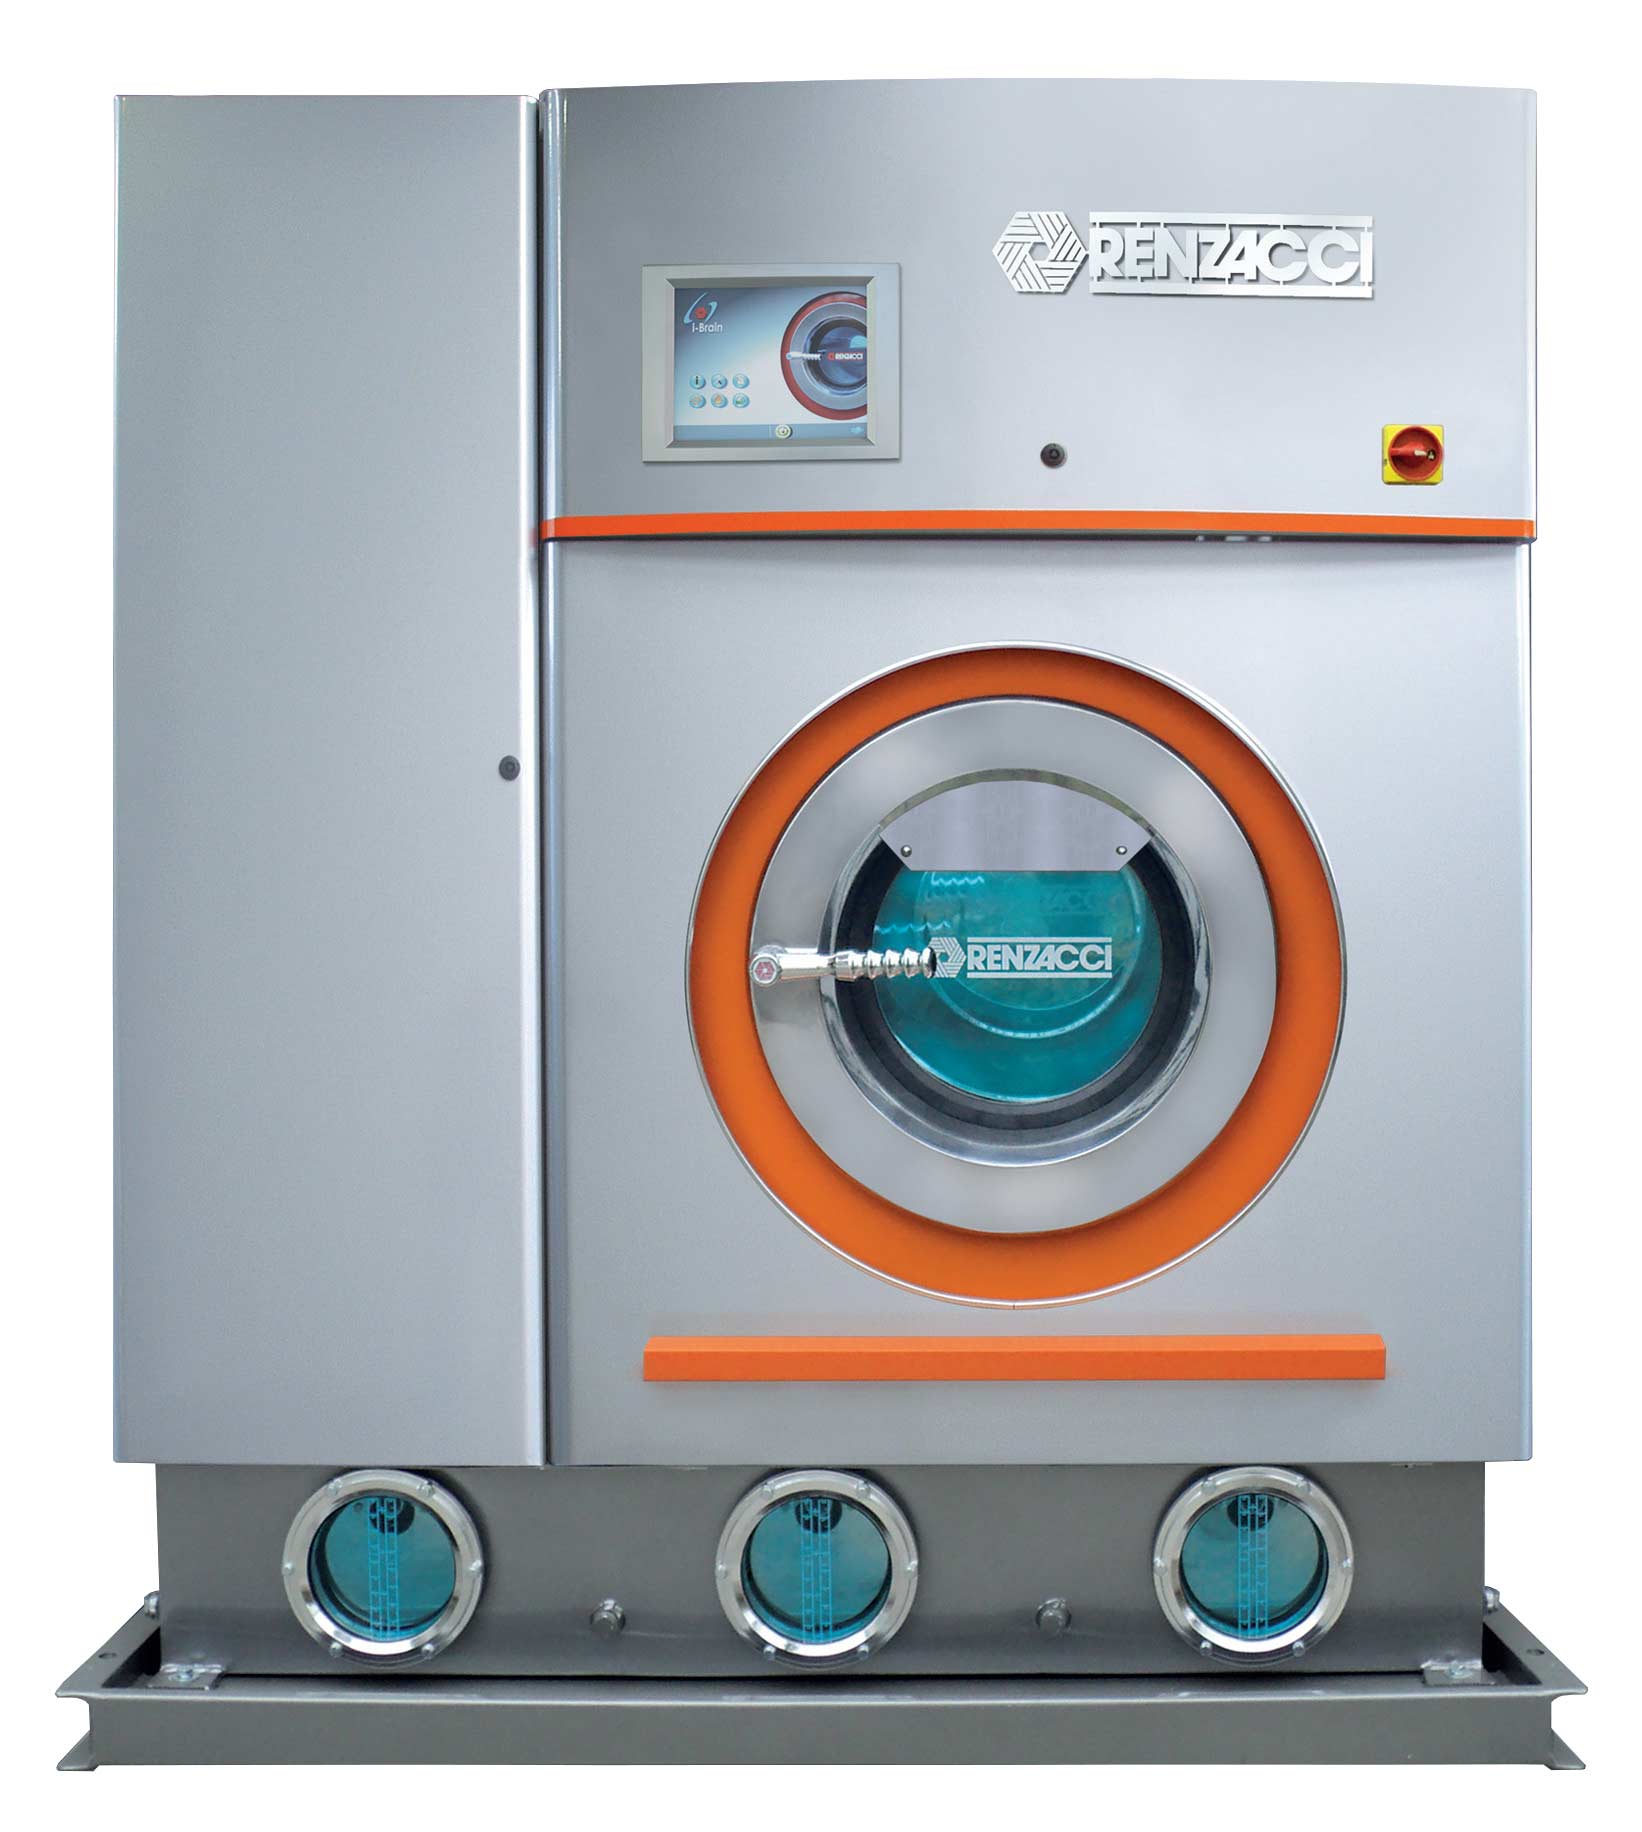 Dry Cleaning: The Dry Cleaning Machine 